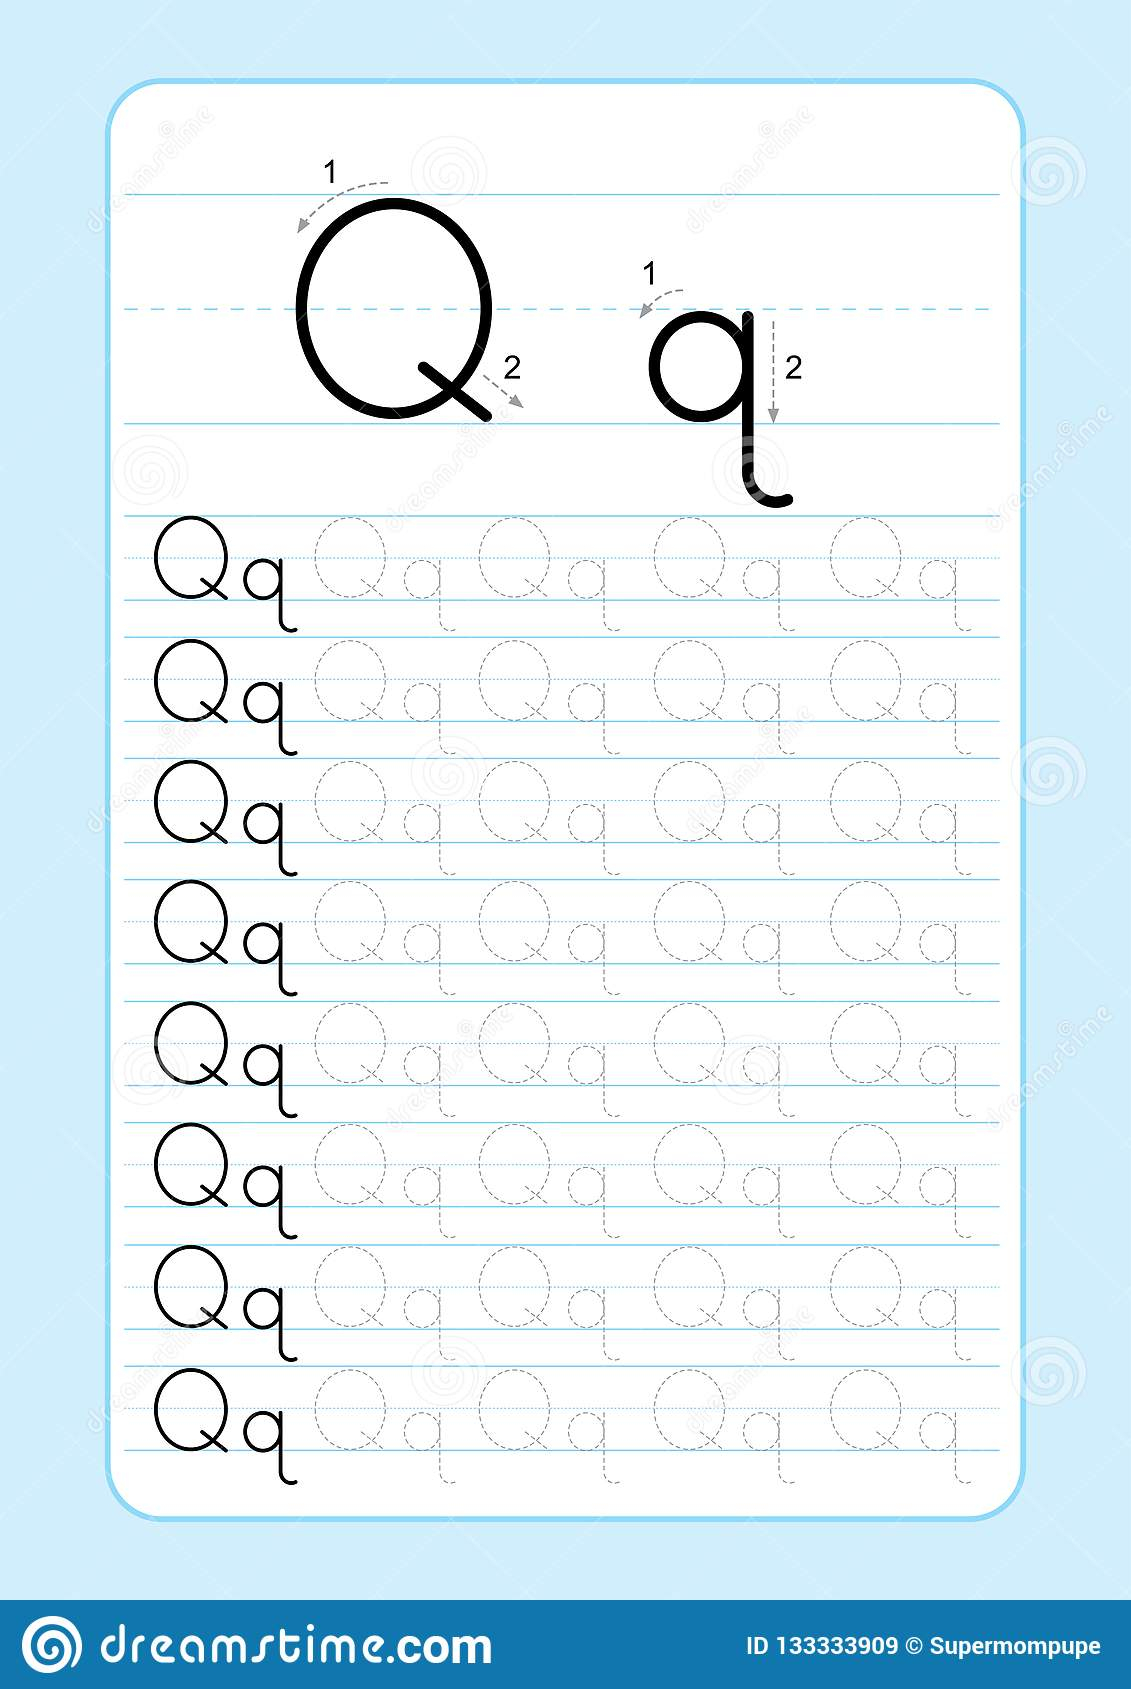 Abc Alphabet Letters Tracing Worksheet With Alphabet Letters